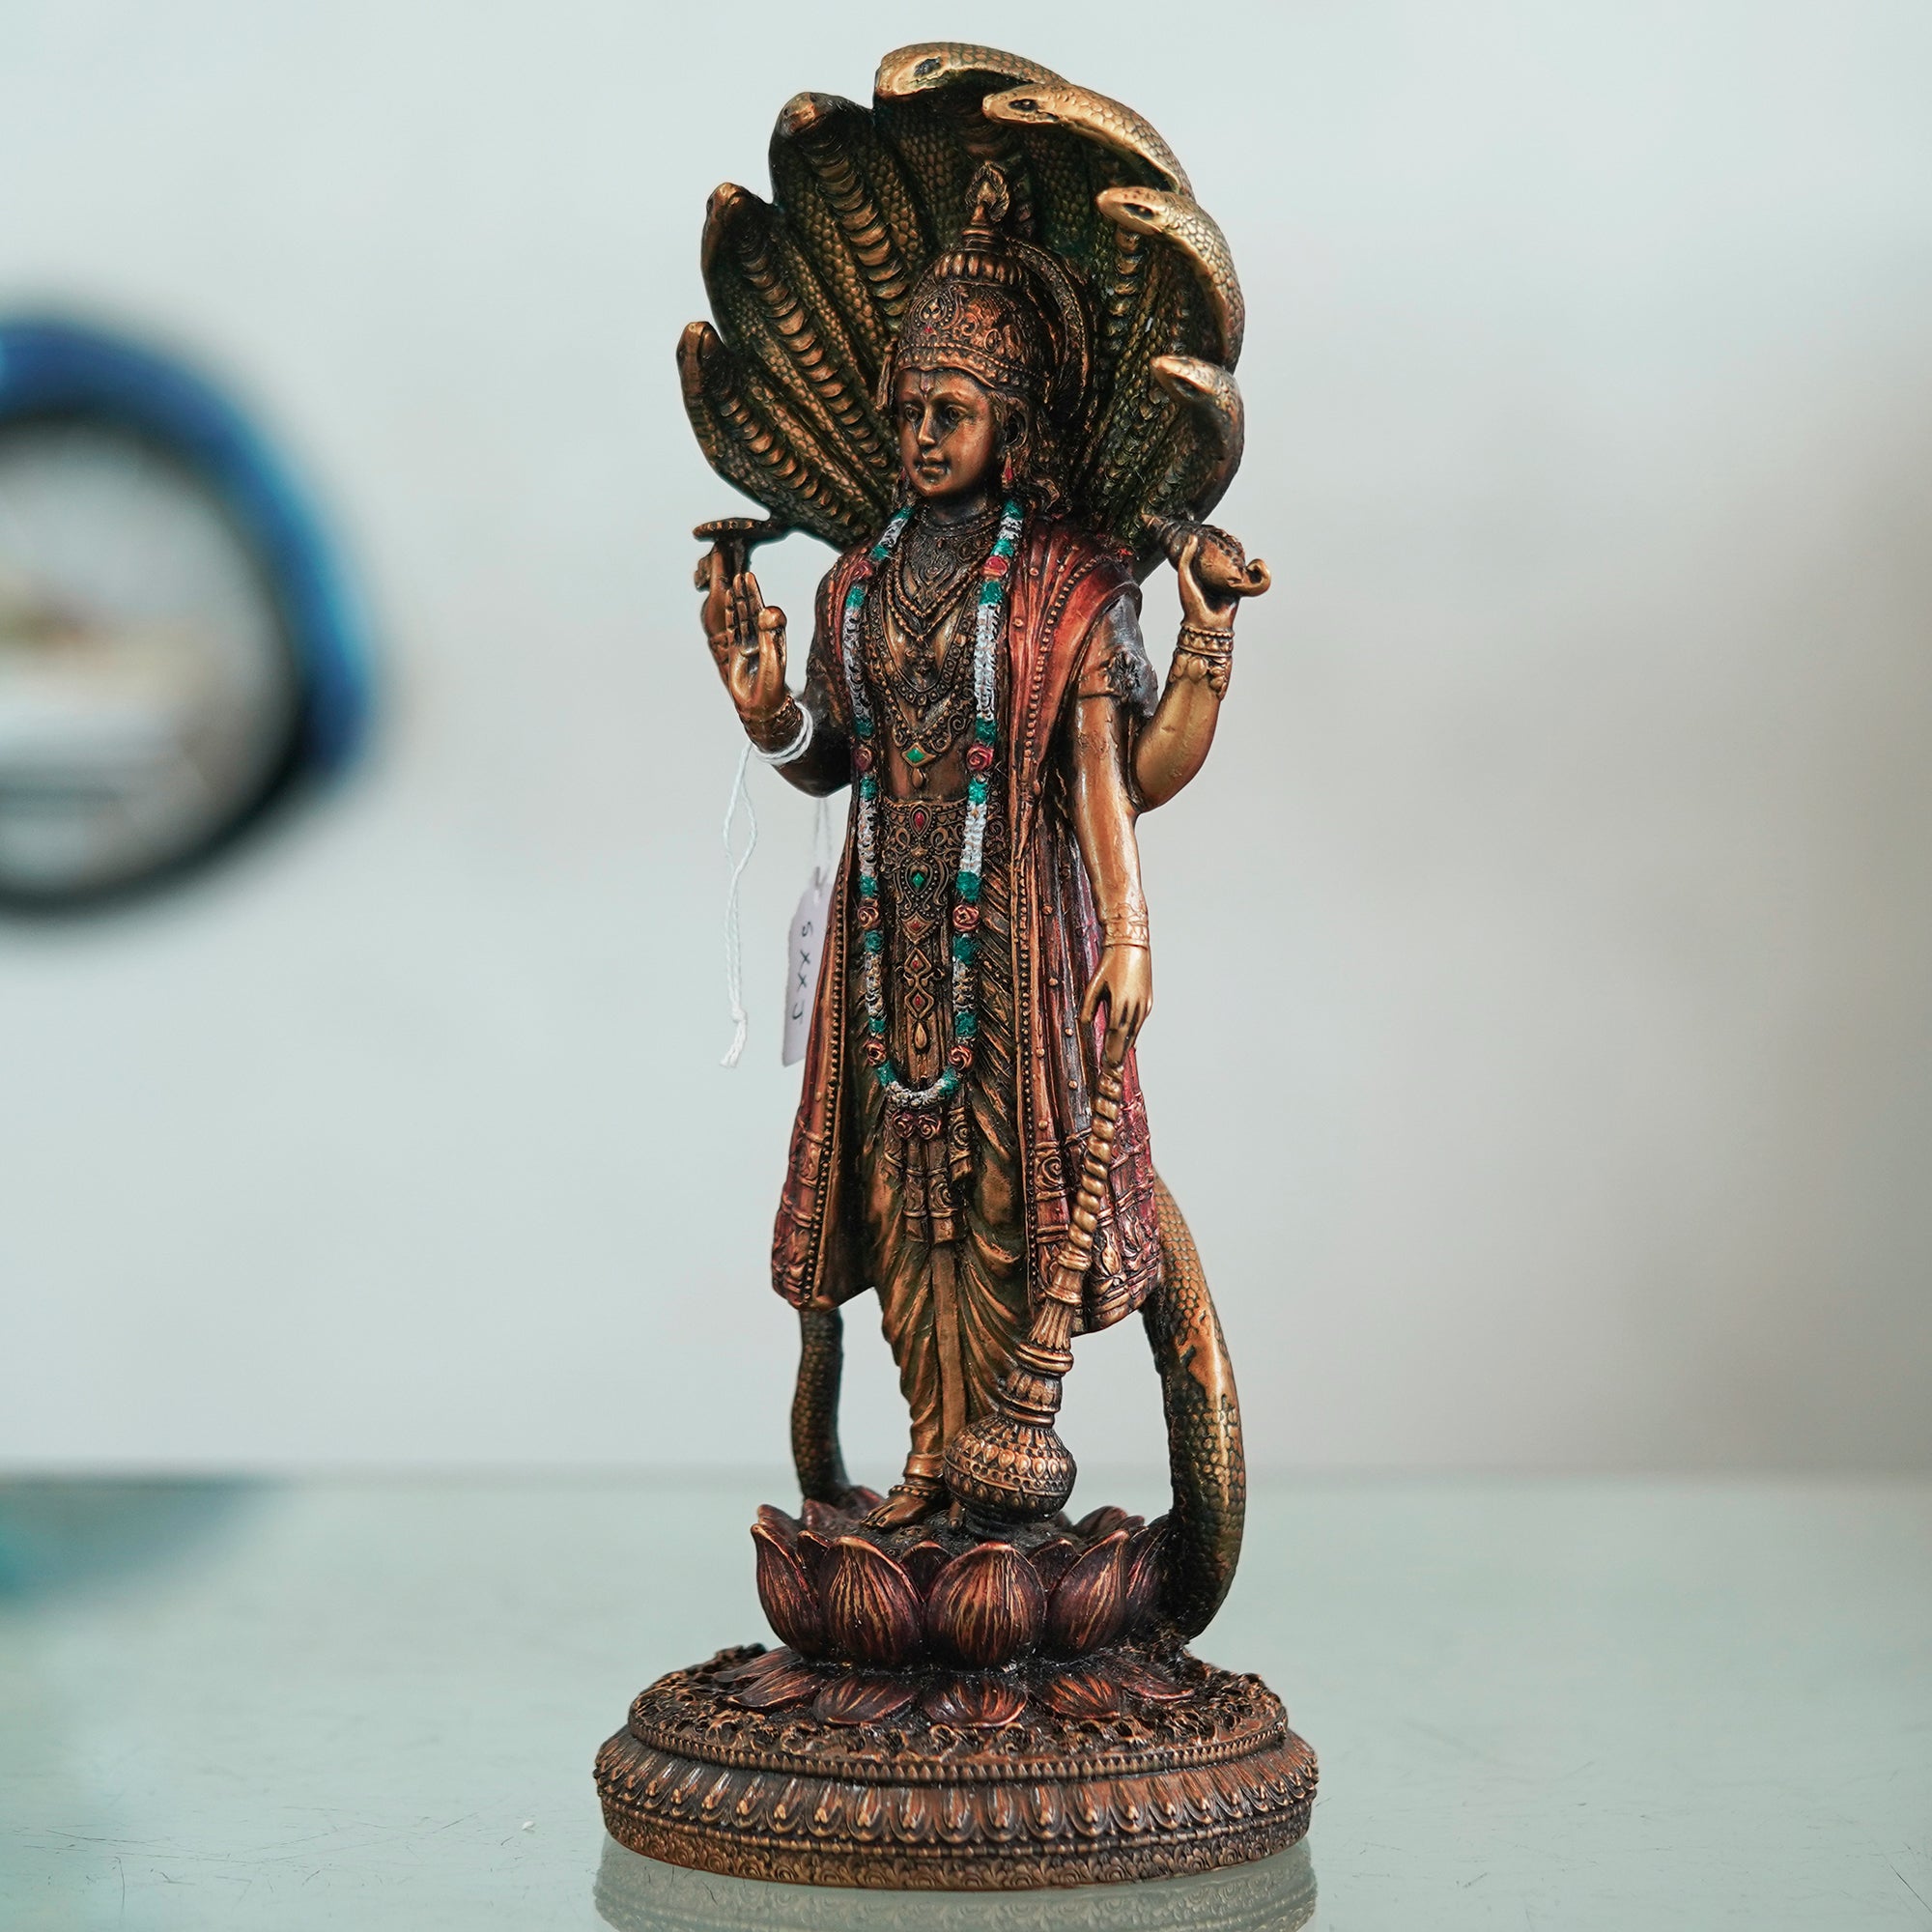 Deveie Crafts Resplendent Metal Lord: The Majesty of Vishnu Forged in Alloyed Grace